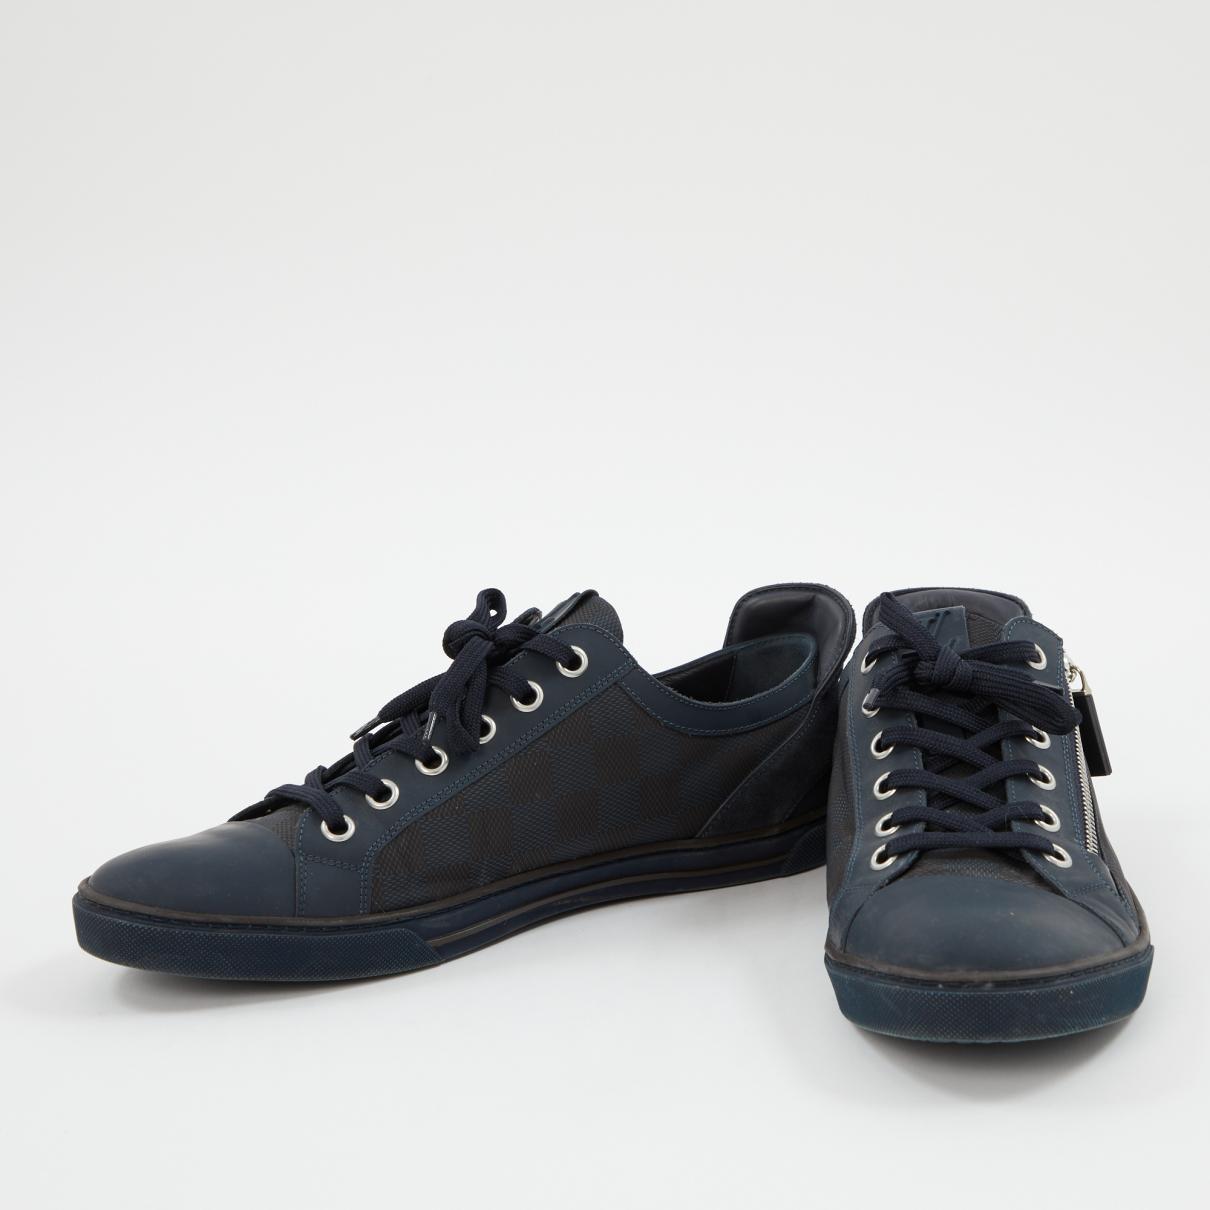 Louis Vuitton Suede Navy Cloth Trainers in Blue for Men - Lyst